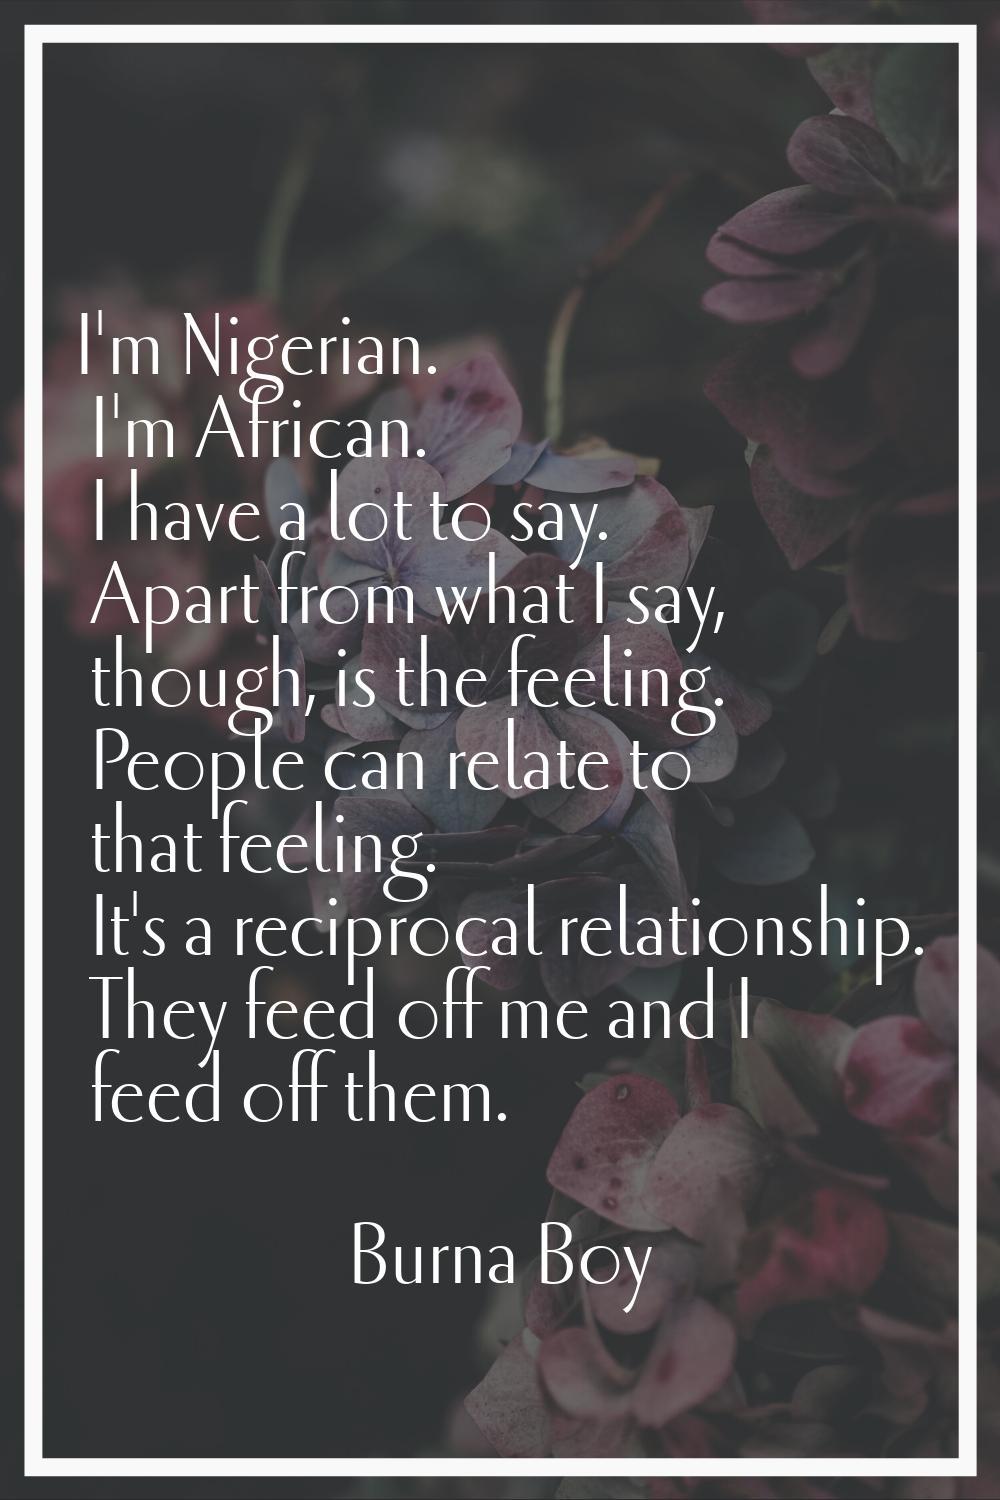 I'm Nigerian. I'm African. I have a lot to say. Apart from what I say, though, is the feeling. Peop